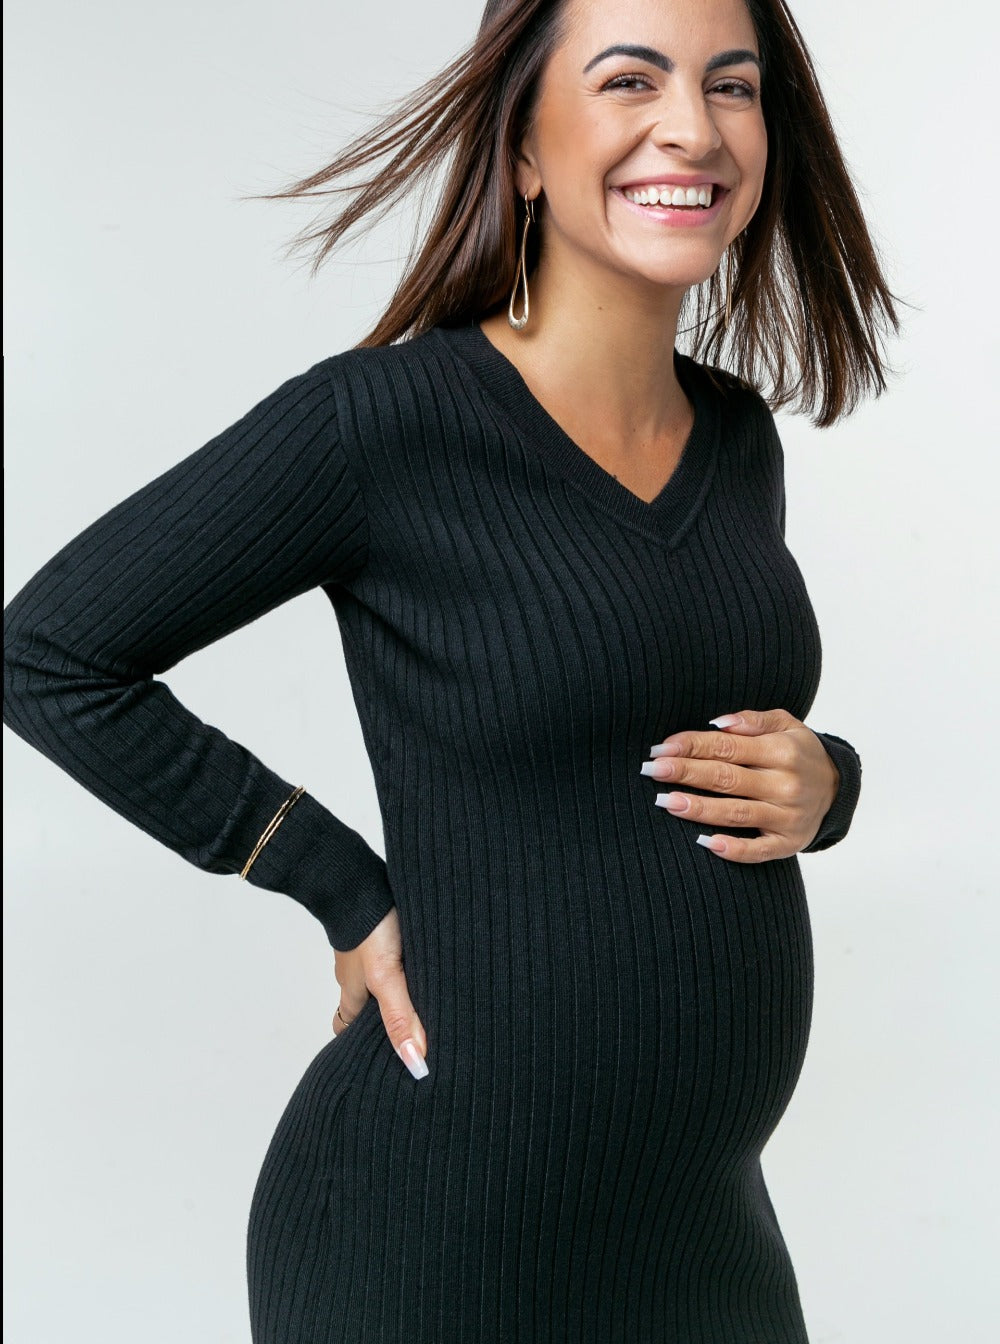 Stylish V Neck Maternity Nursing Top With Long Sleeves For